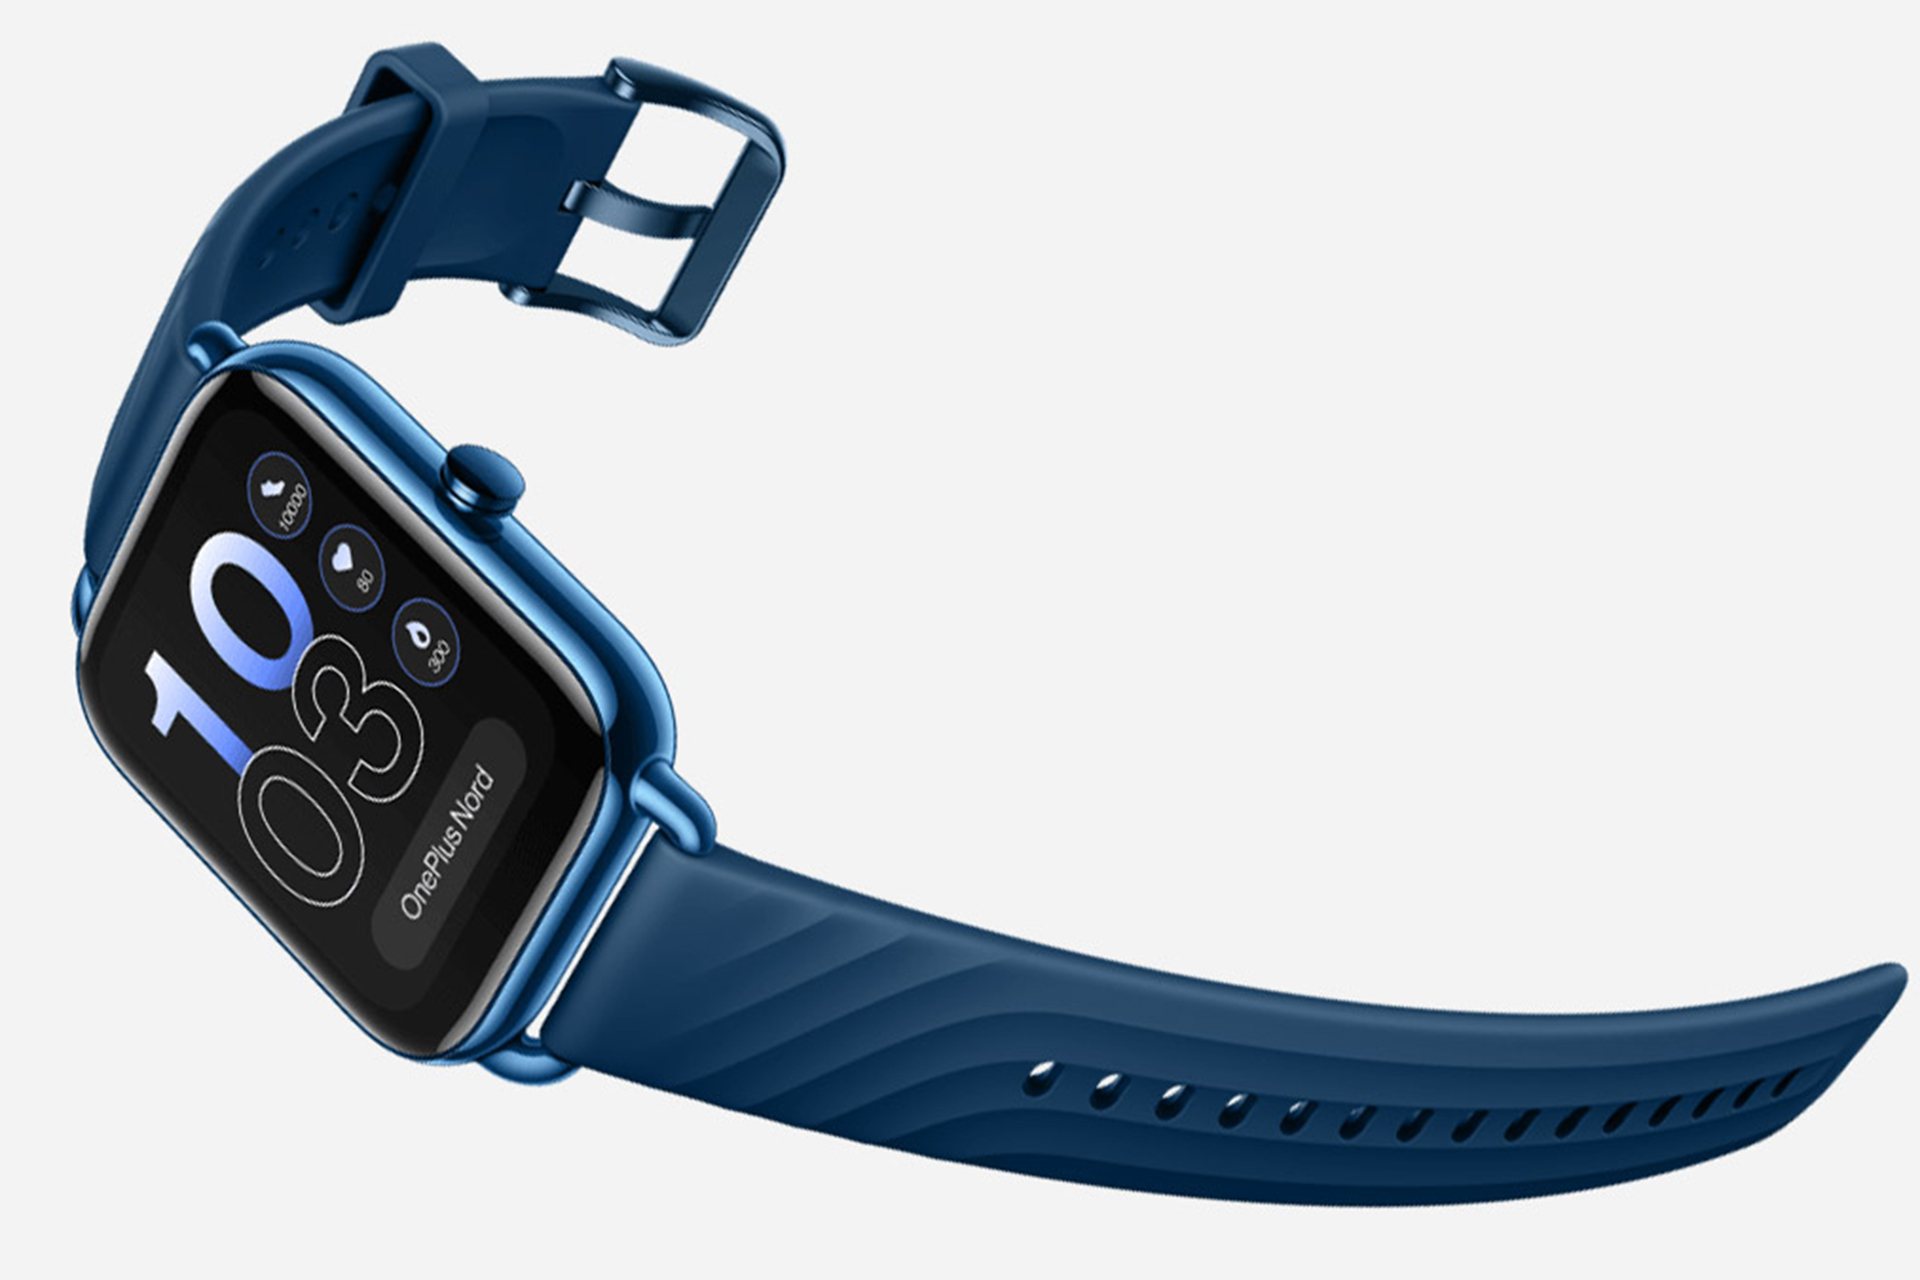 Nordwatch smart watch in blue color